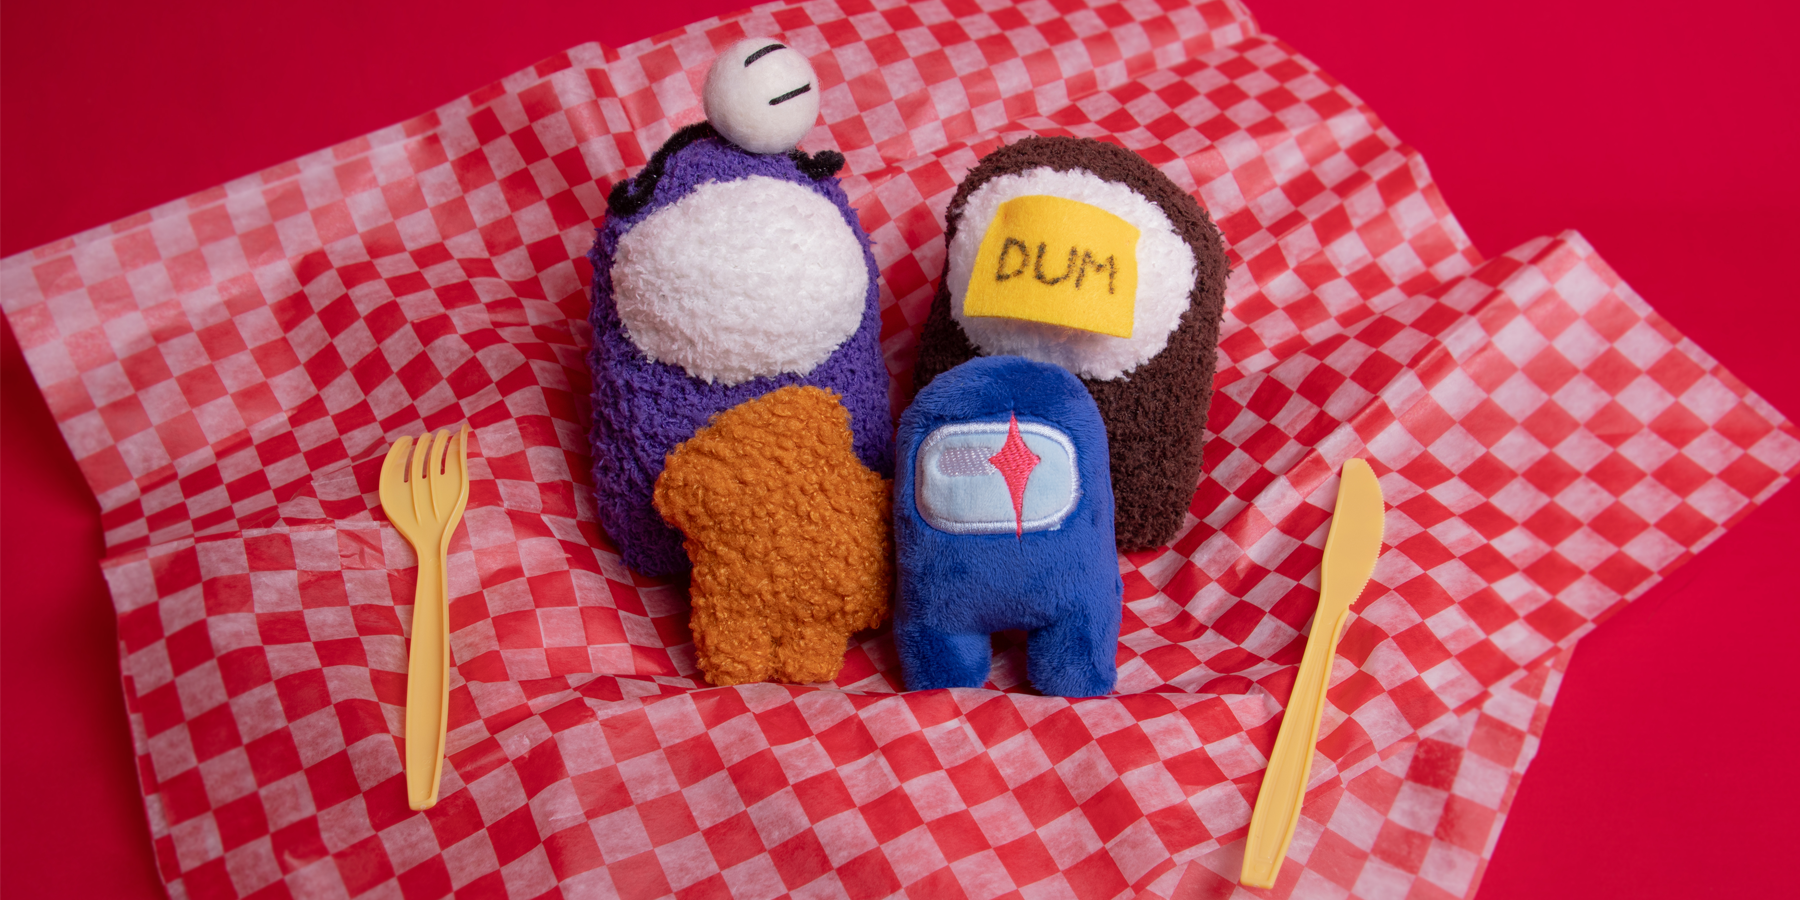 A grouping of four Crewmate plushies in the middle of a sheet of checkered diner tissue paper. There is a yellow plastic fork and knife on either side of the plush.